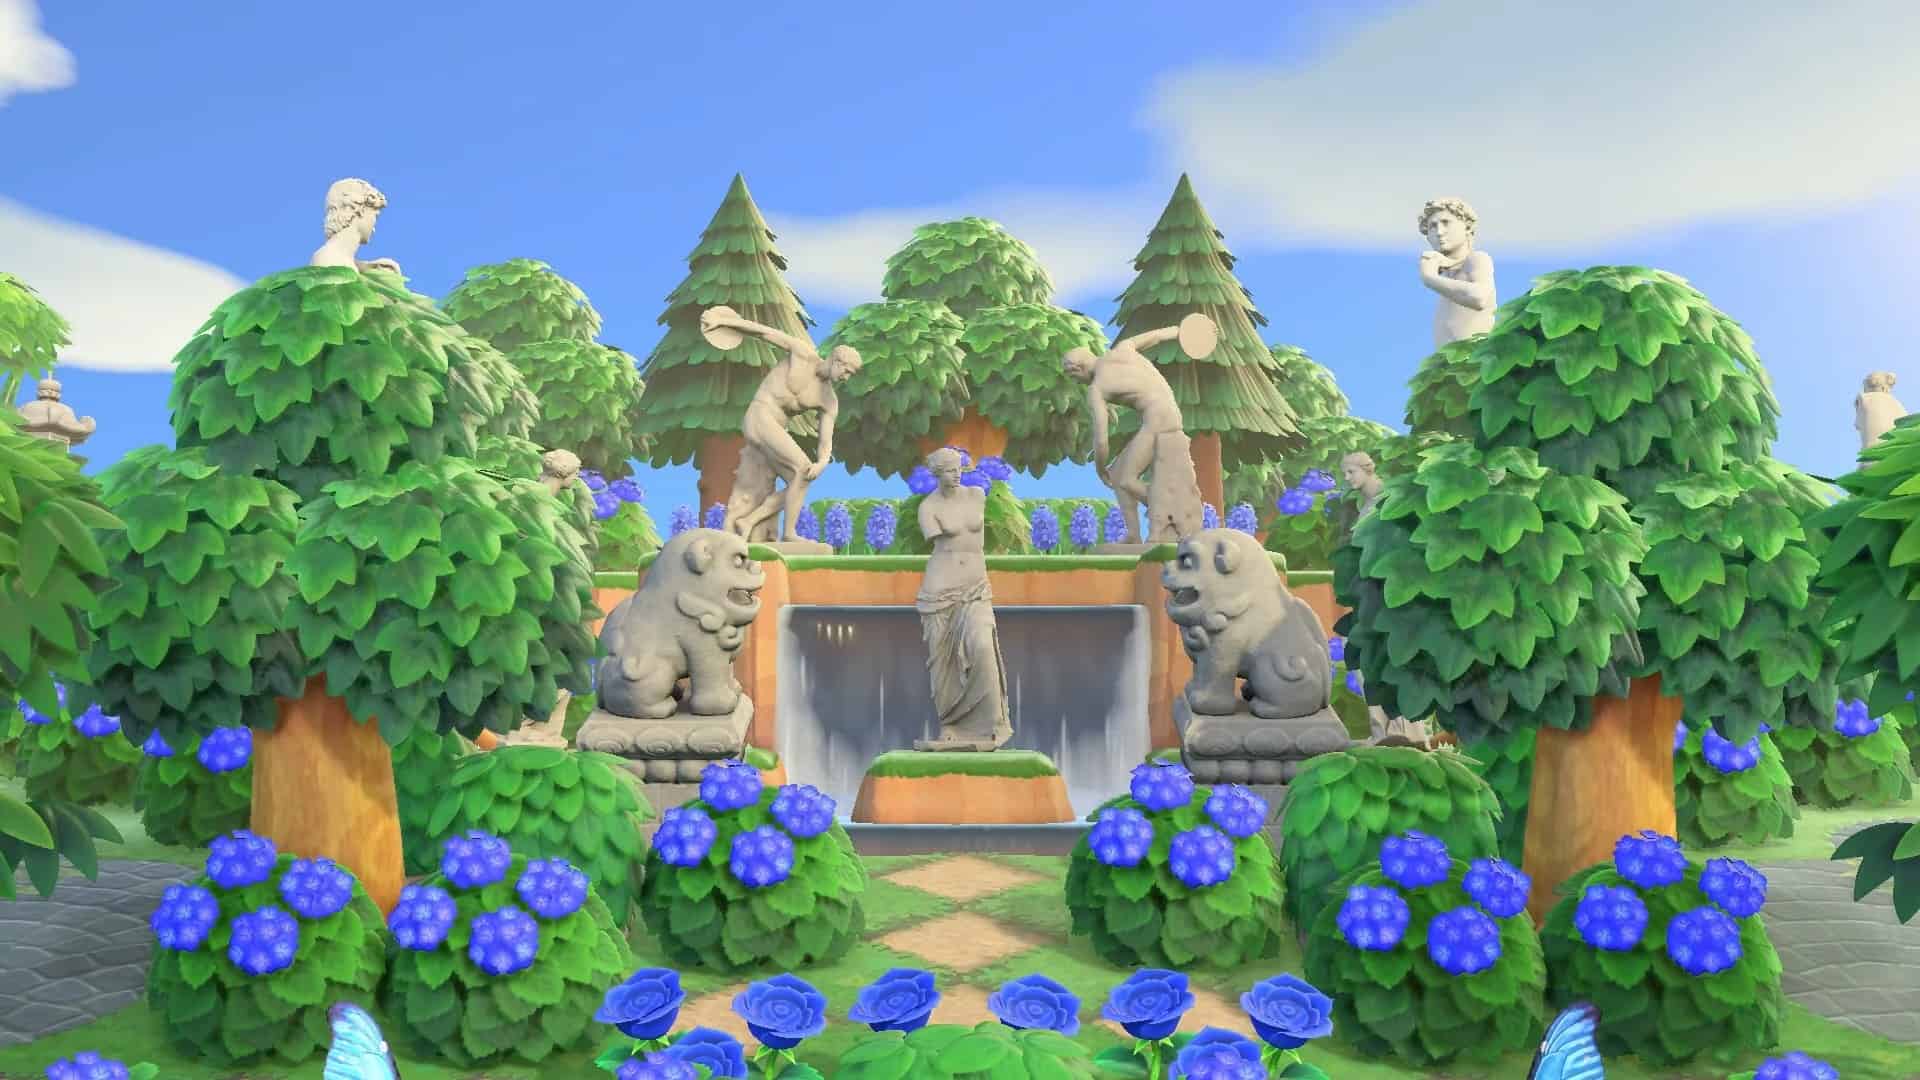 Courtyards Design Ideas in Animal Crossing New Horizons